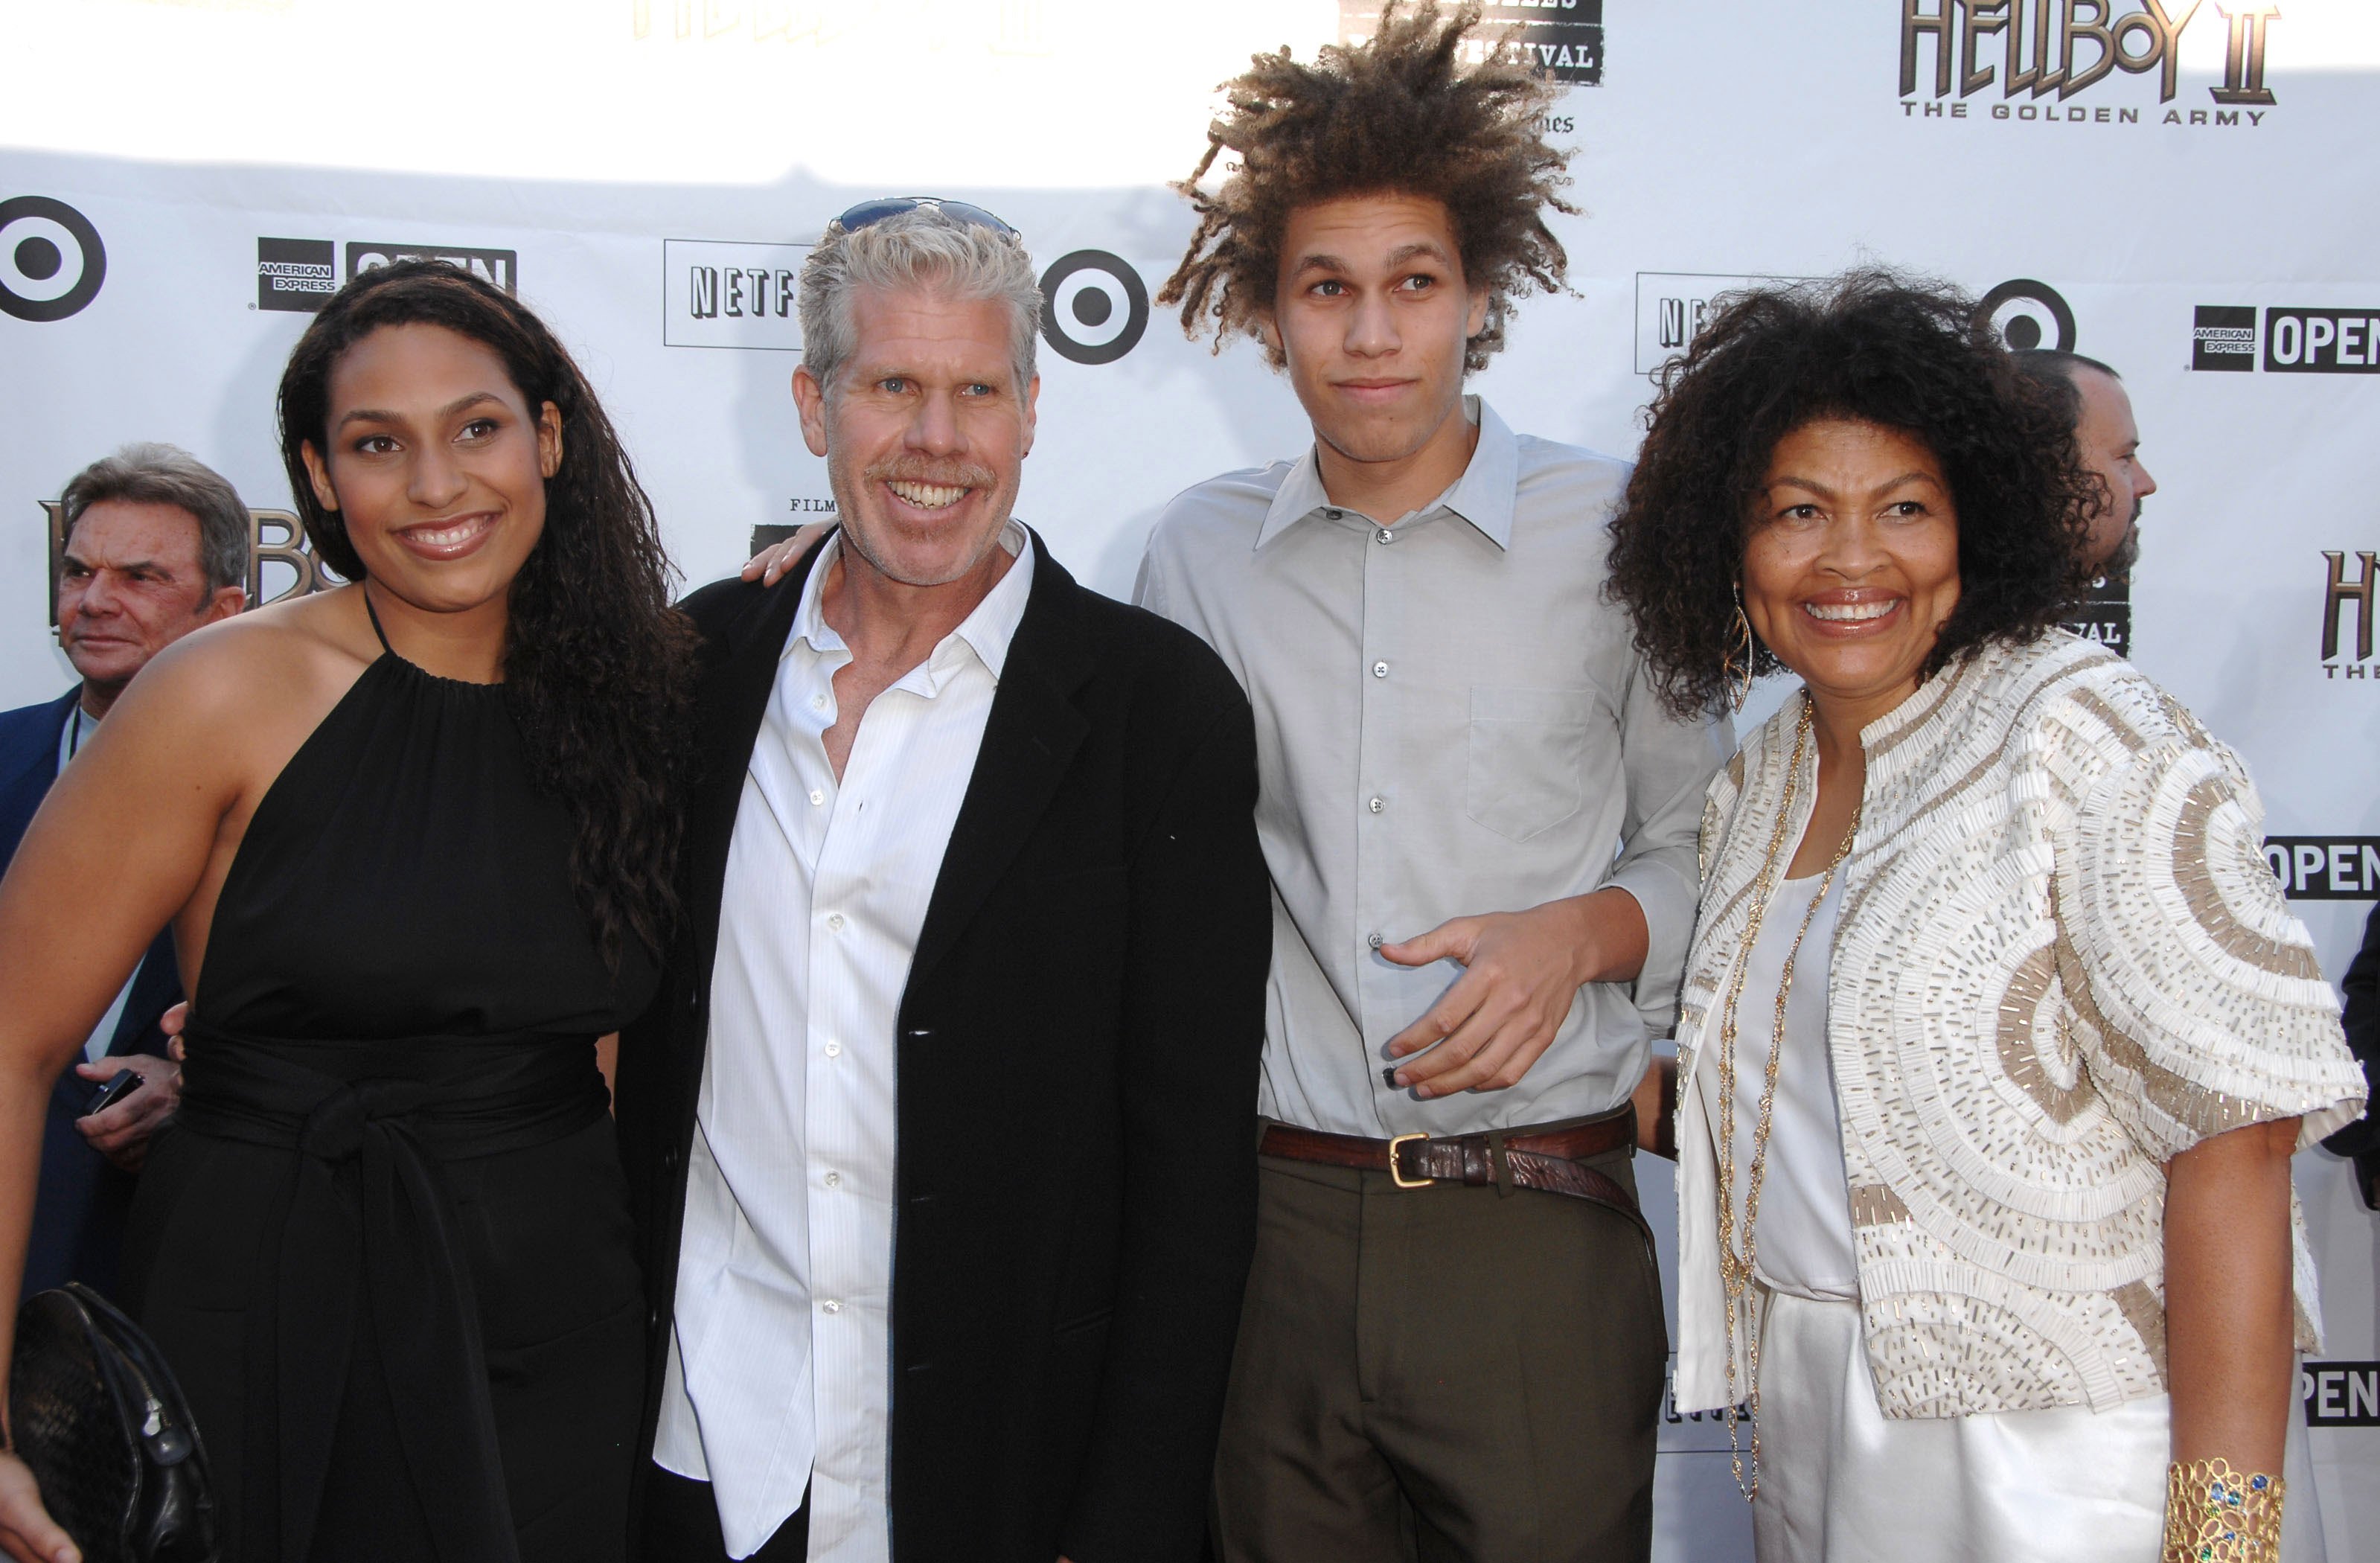 Blake, Ron, Brandon, and Opal Perlman at the world premiere of "Hellboy II: The Golden Army" for the Los Angeles Film Festival on June 28, 2008, in Los Angeles, California. | Source: Getty Images